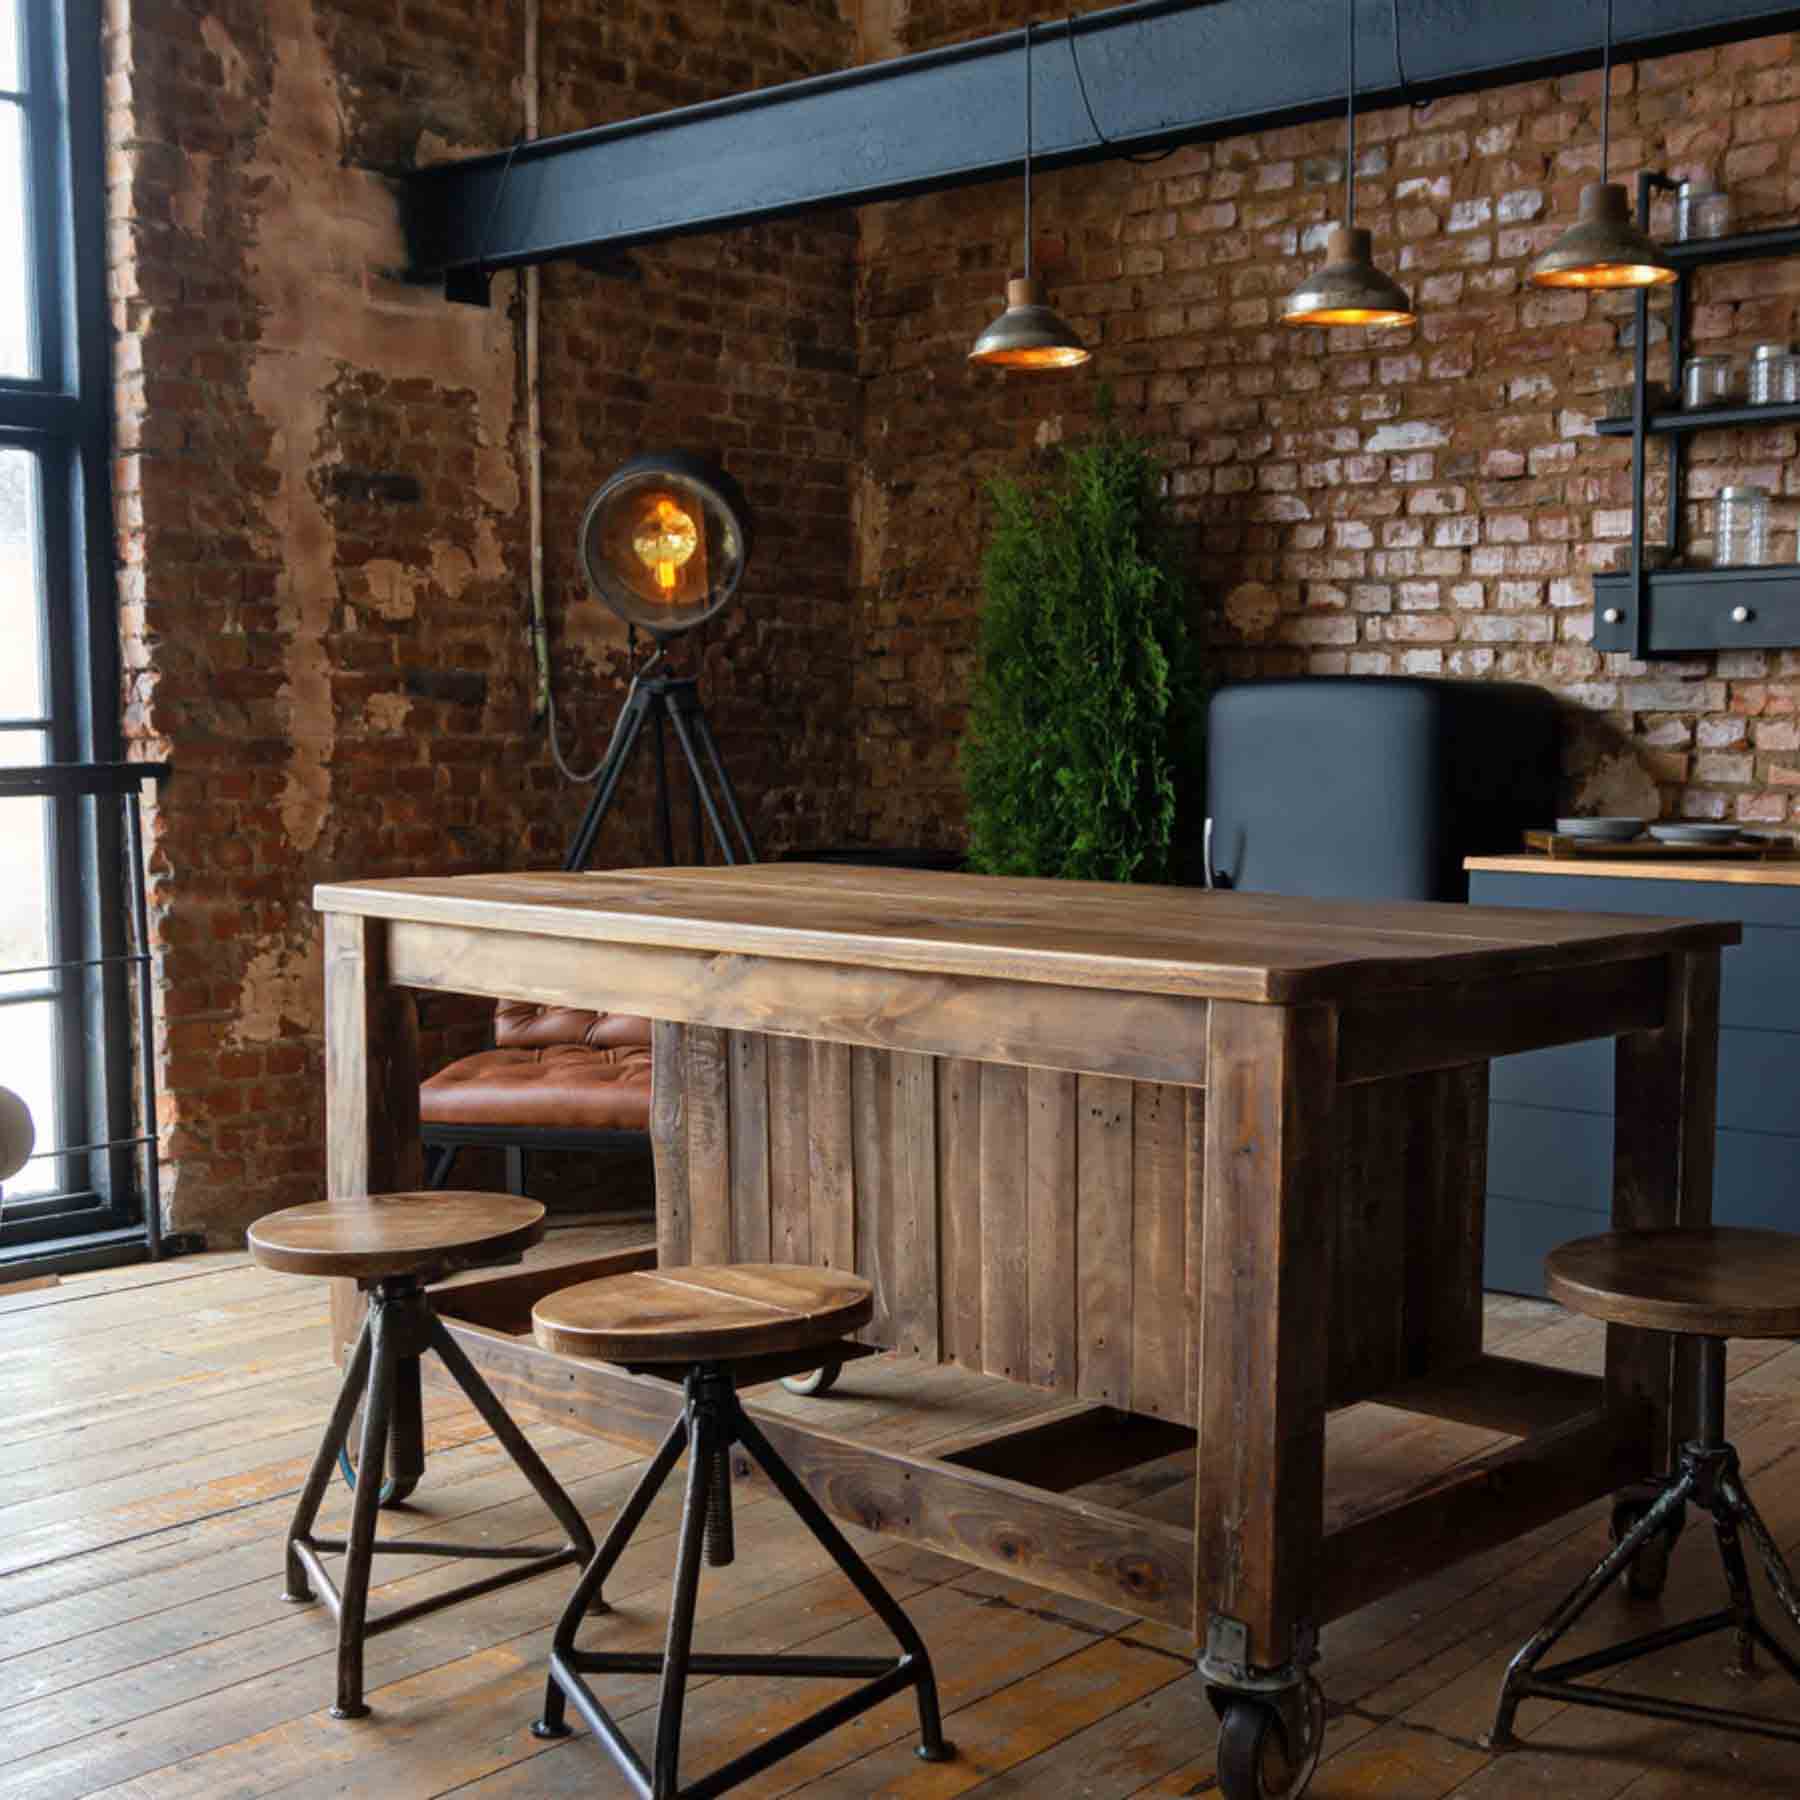 rustic authenticity defines the core of this interior design style